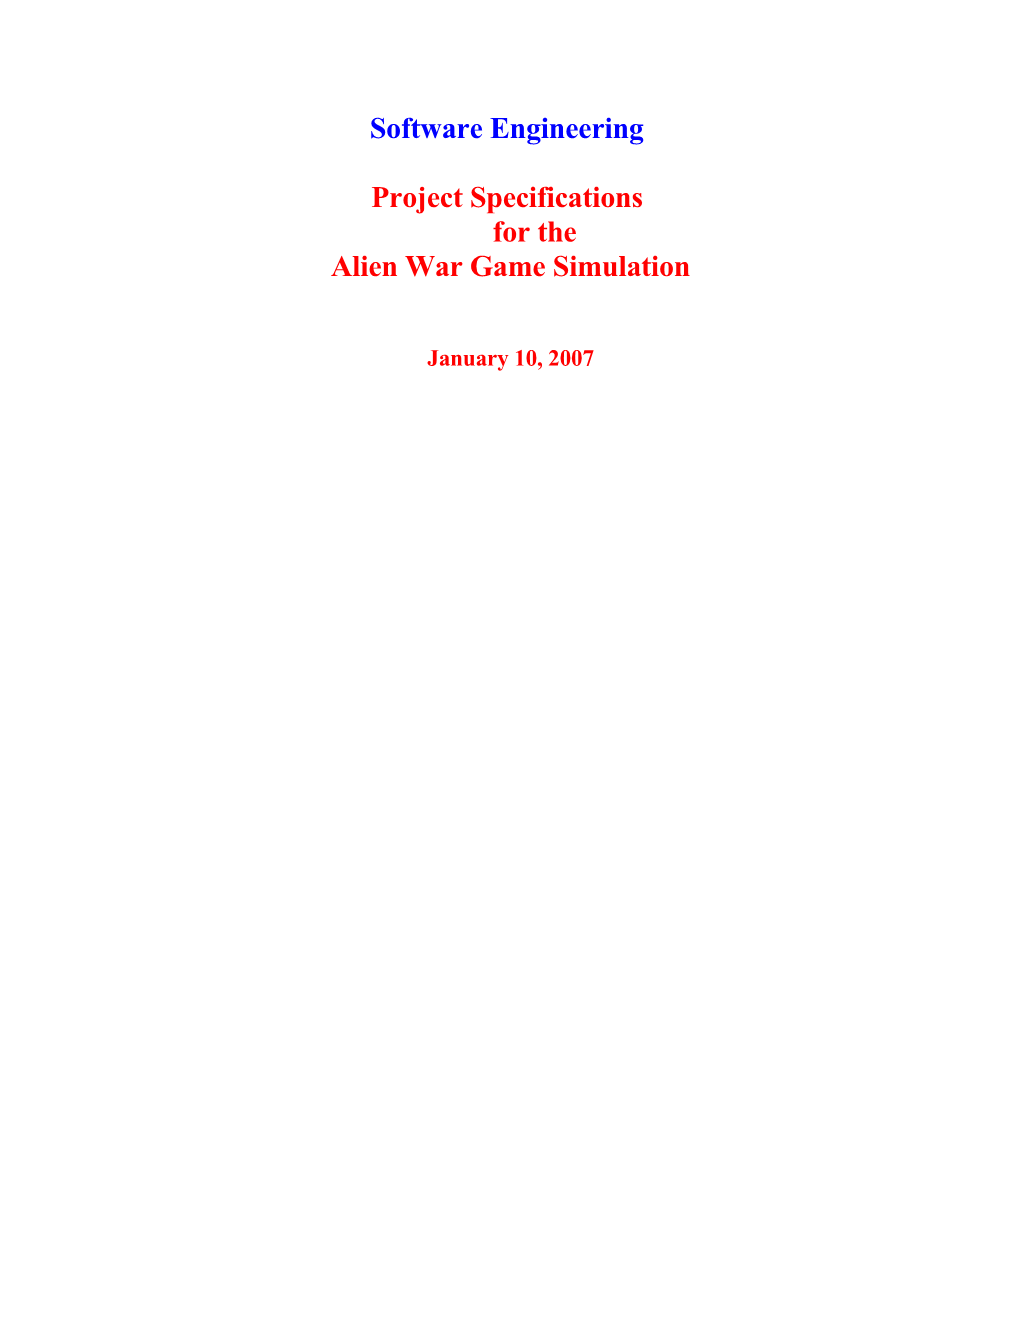 Project Specifications for The